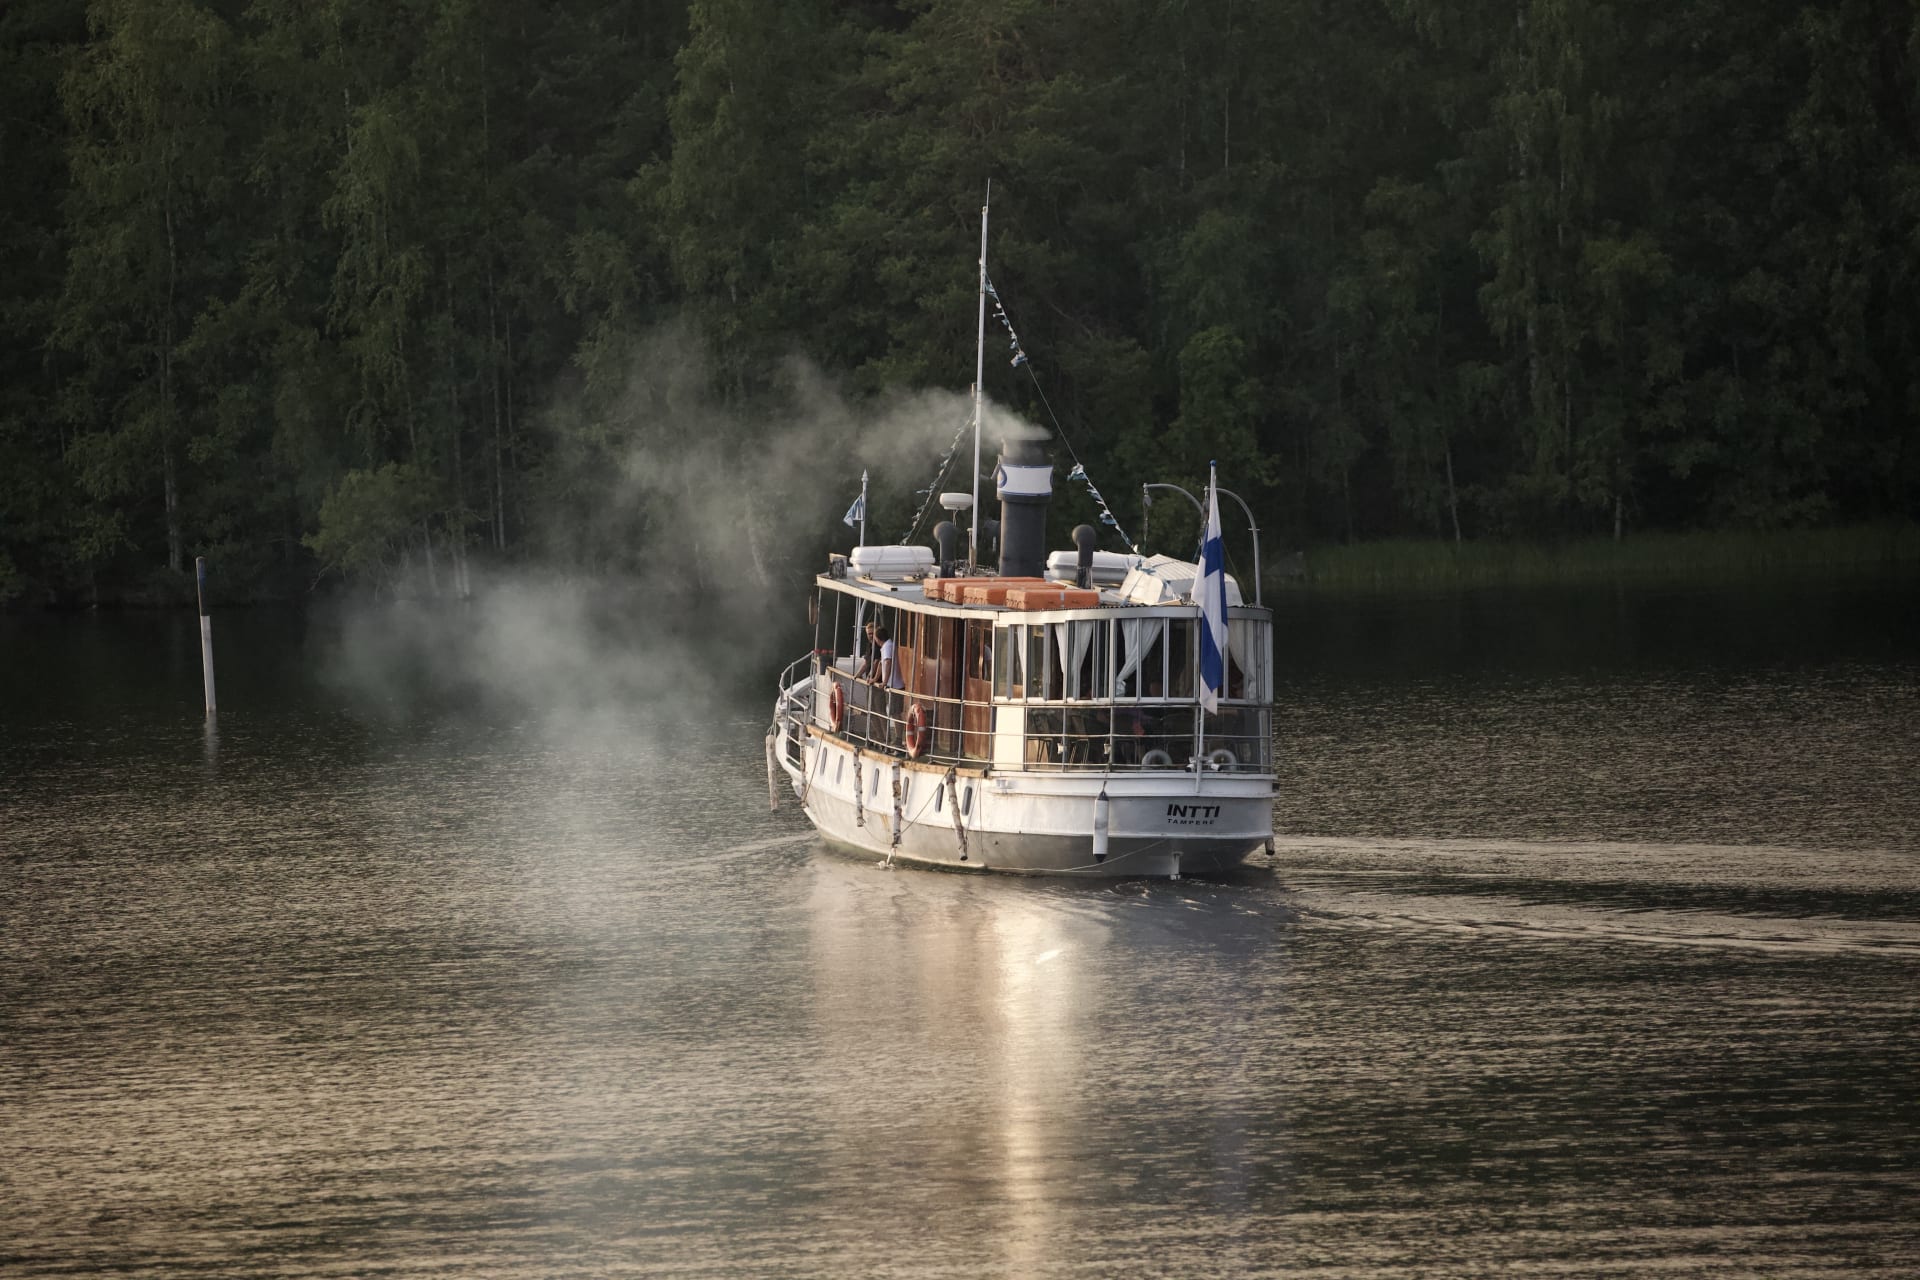 Evening cruise from Maisansalo to Tampere